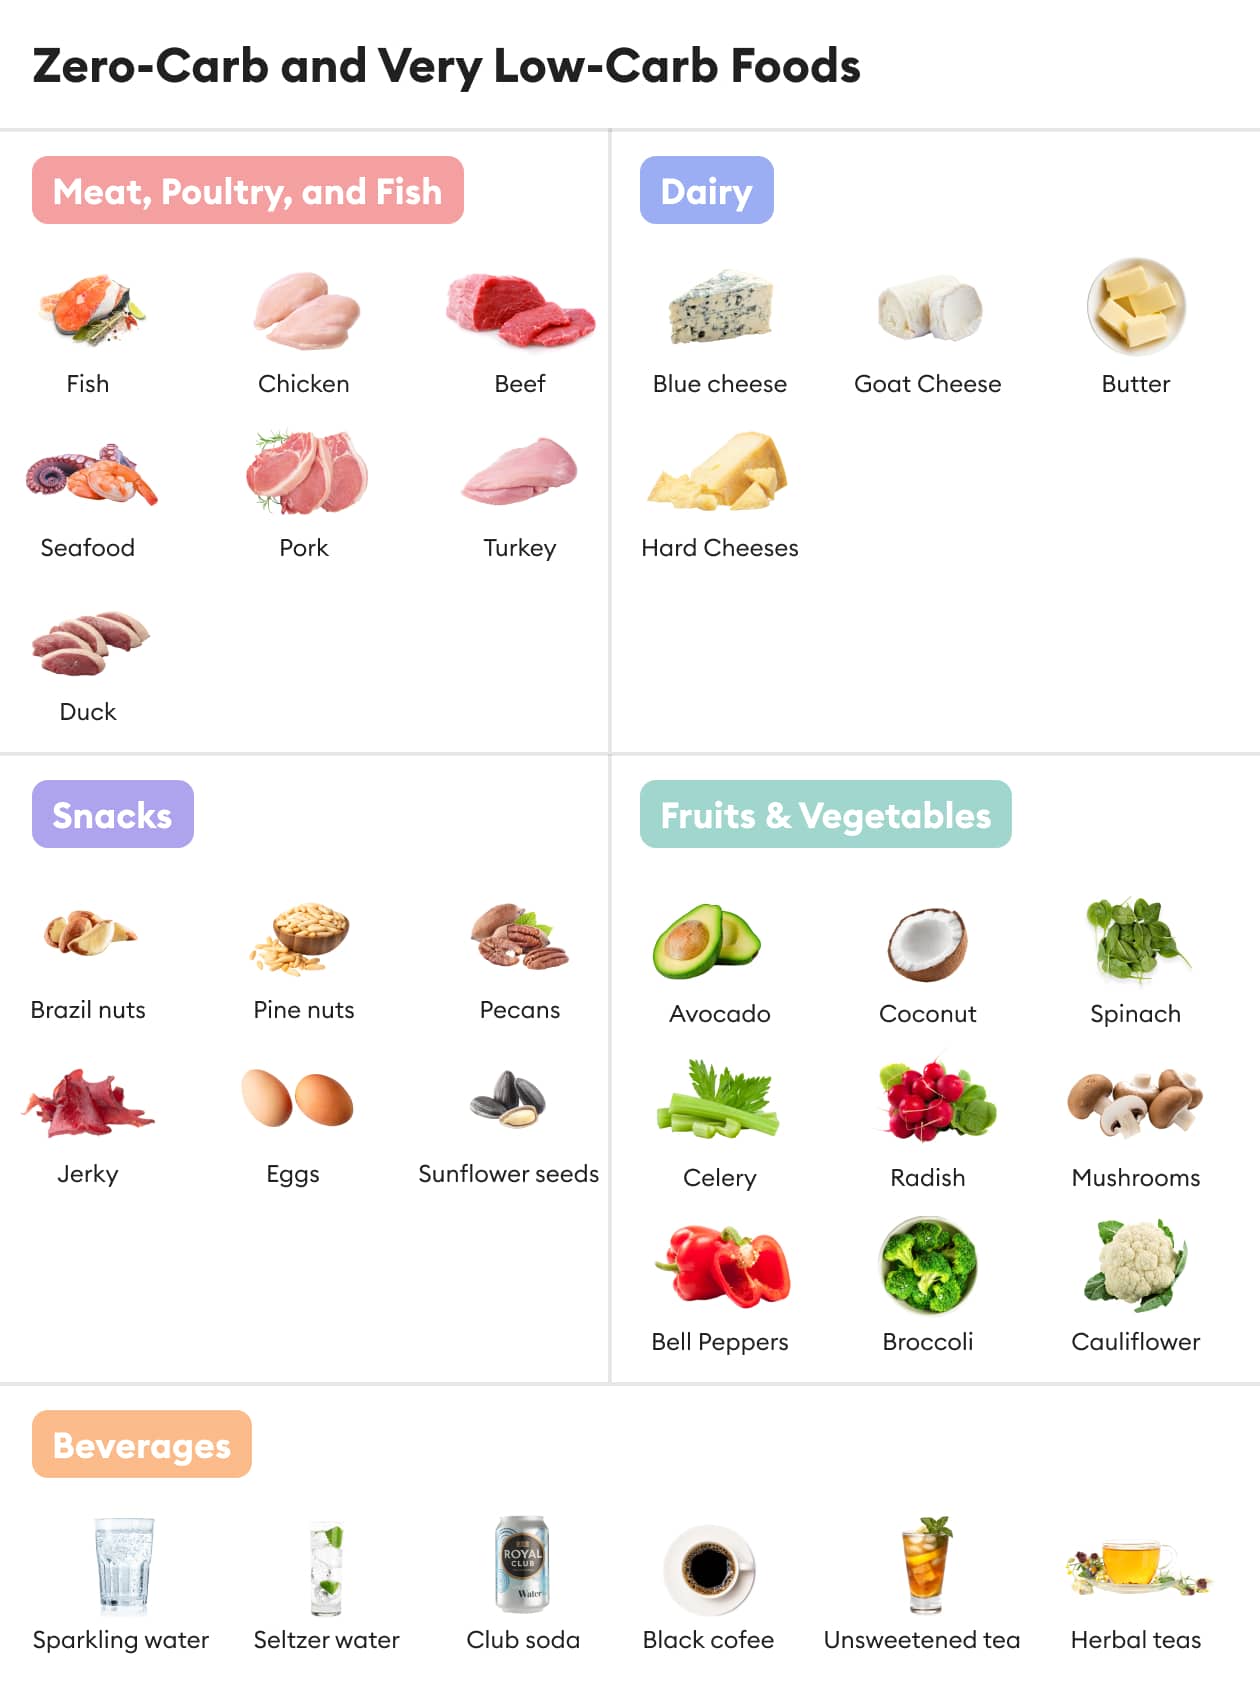 a list of zero-carb foods as well as low-carb foods, including meat, fish, seafood, dairy, snacks, fruits, vegetables and drinks